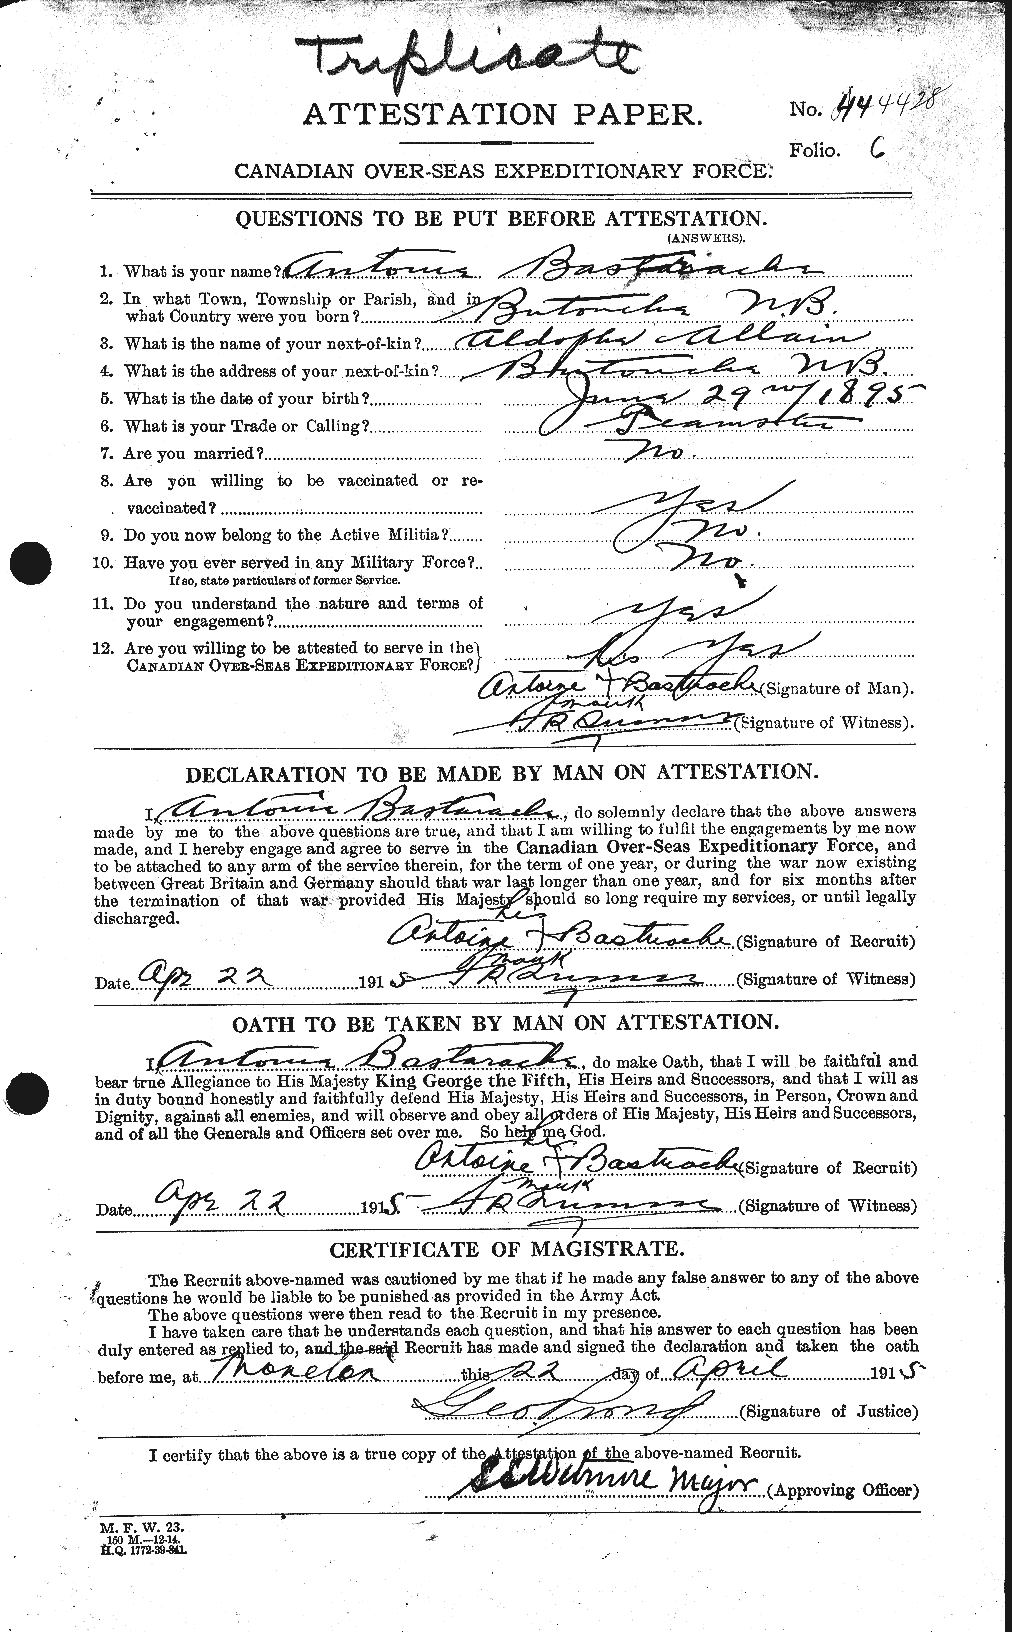 Personnel Records of the First World War - CEF 228286a